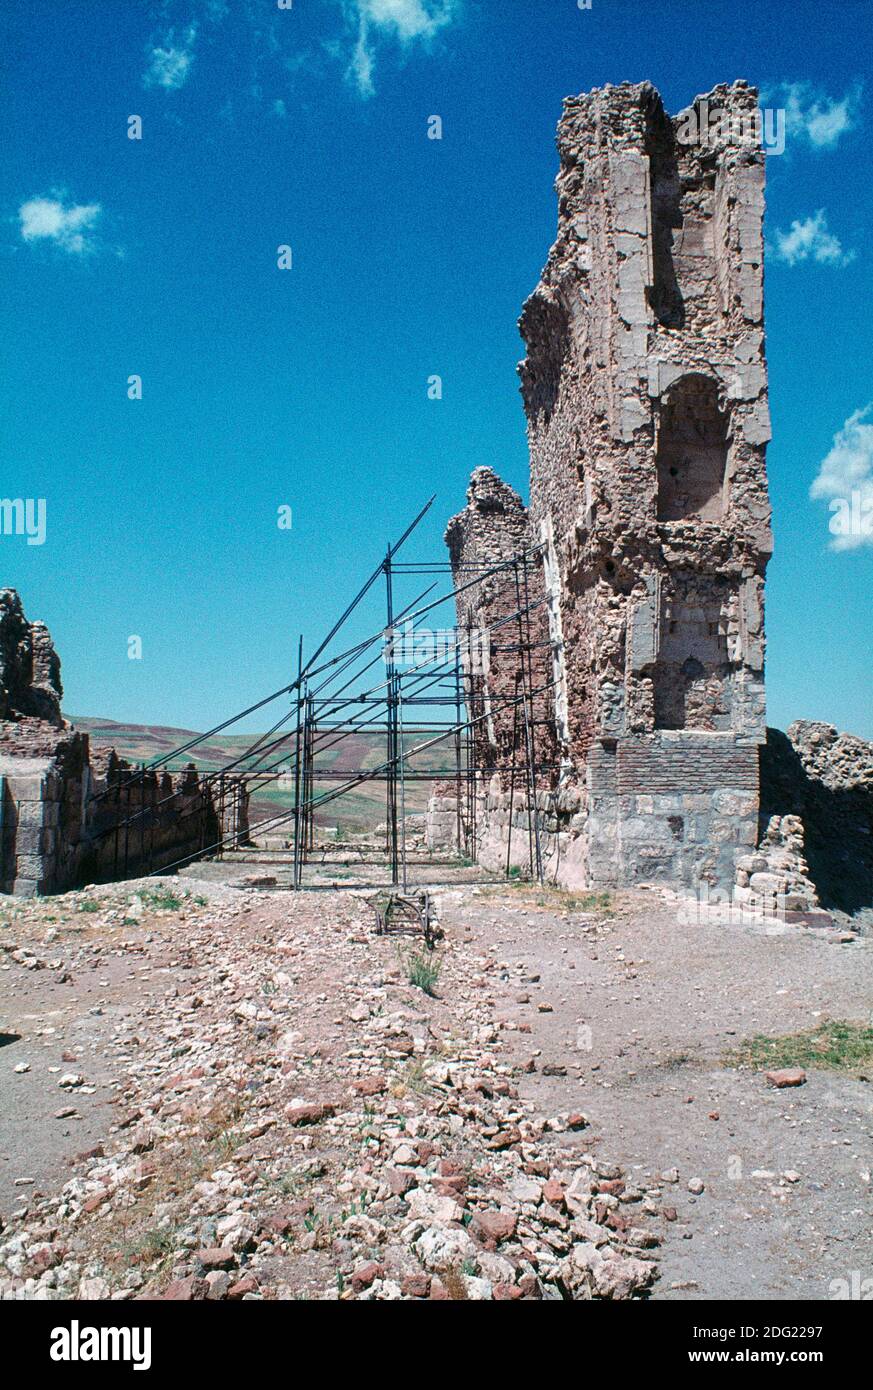 remains of Ilkhanid iwan, Takht-e Sulaiman, site of Sasanian fire temple and Mongol palace, Azerbaijan province, Iran. Stock Photo